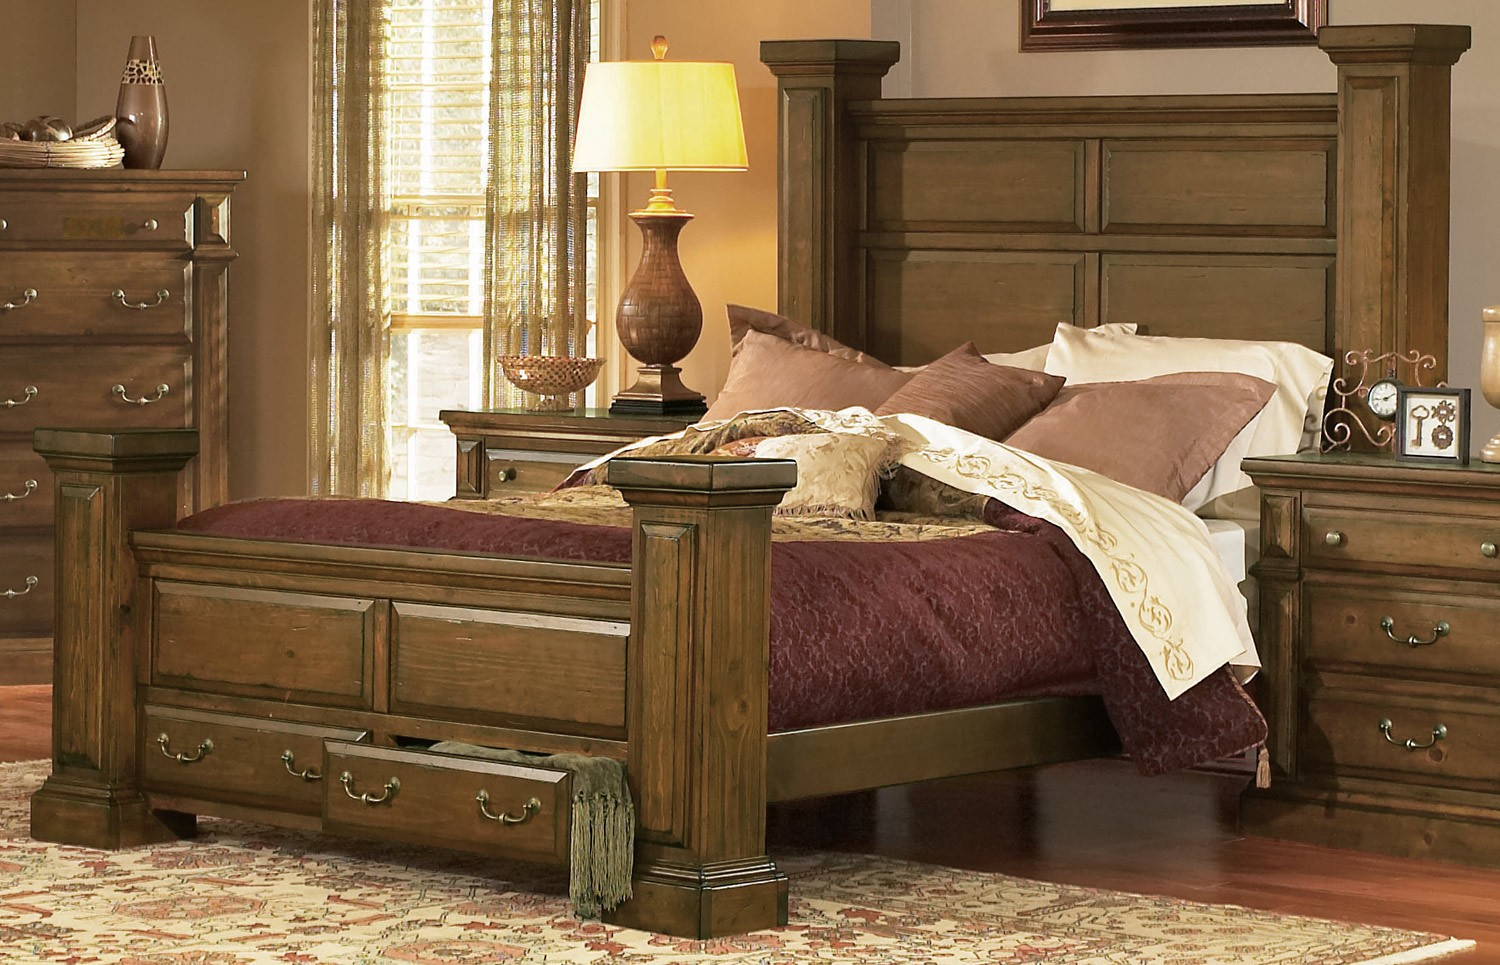 Antique Wood Bedroom Furniture Image Antique And Candle regarding dimensions 1500 X 965